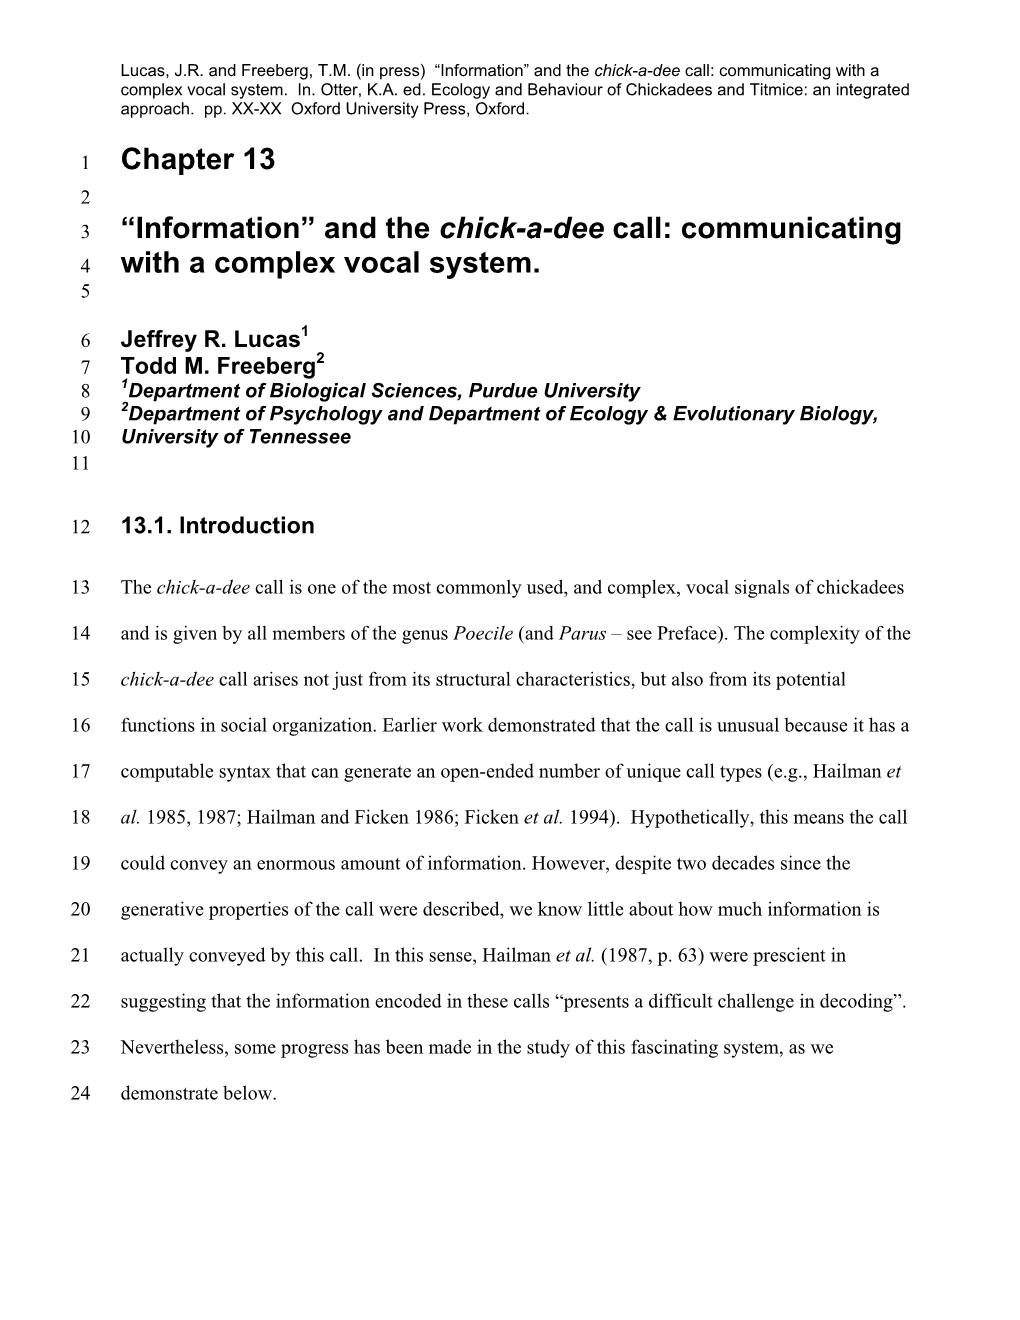 Chapter 13 “Information” and the Chick-A-Dee Call: Communicating with a Complex Vocal System